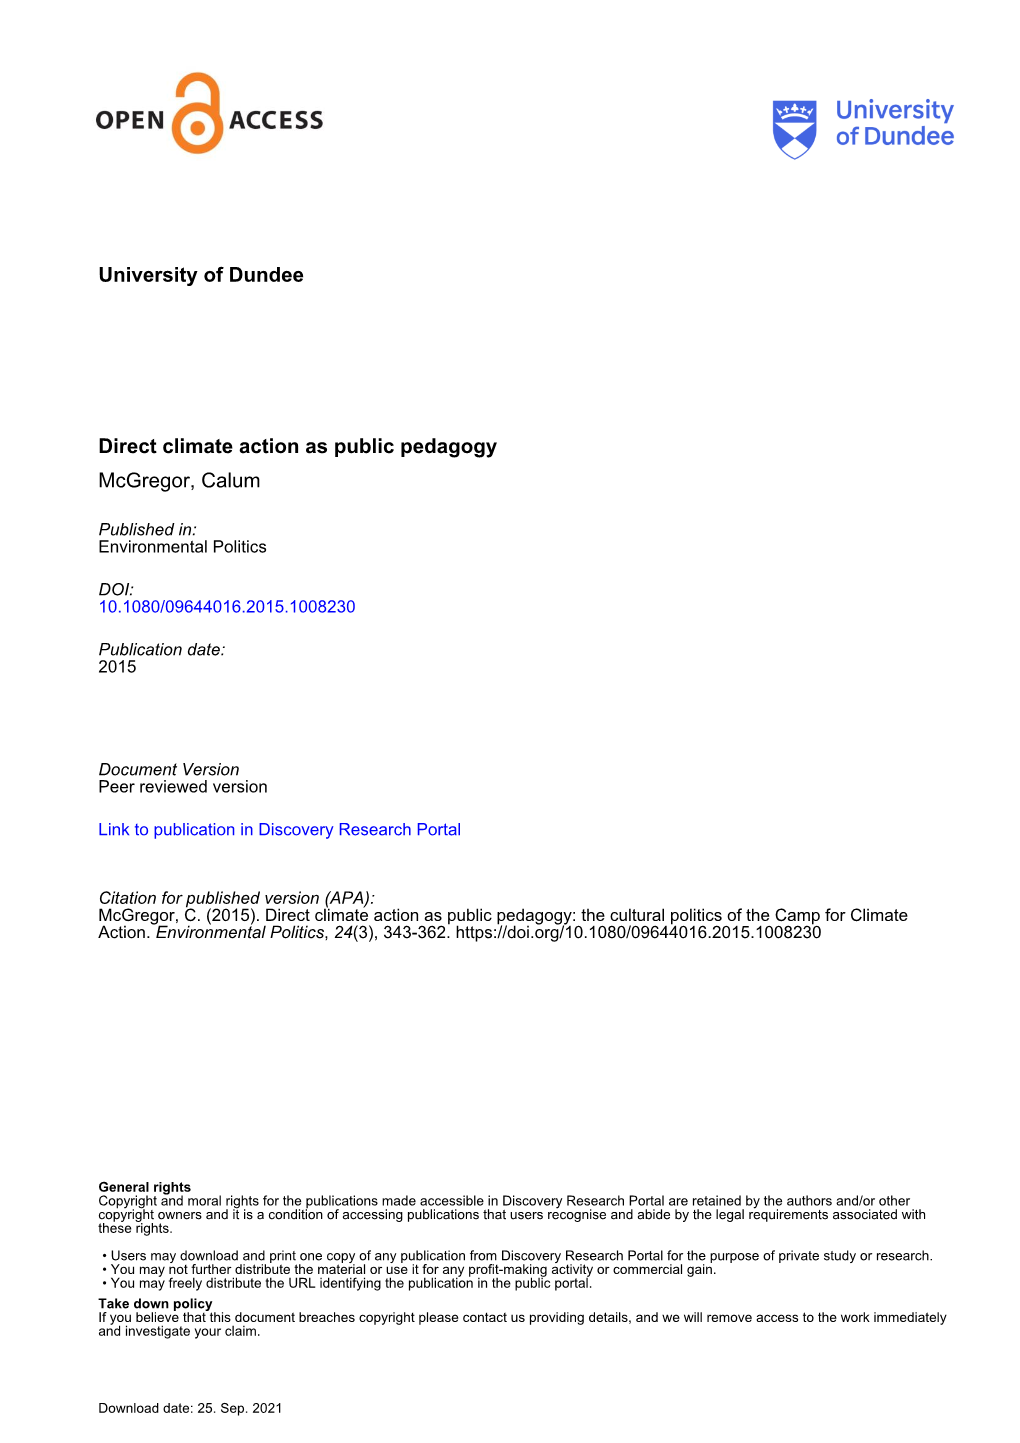 University of Dundee Direct Climate Action As Public Pedagogy